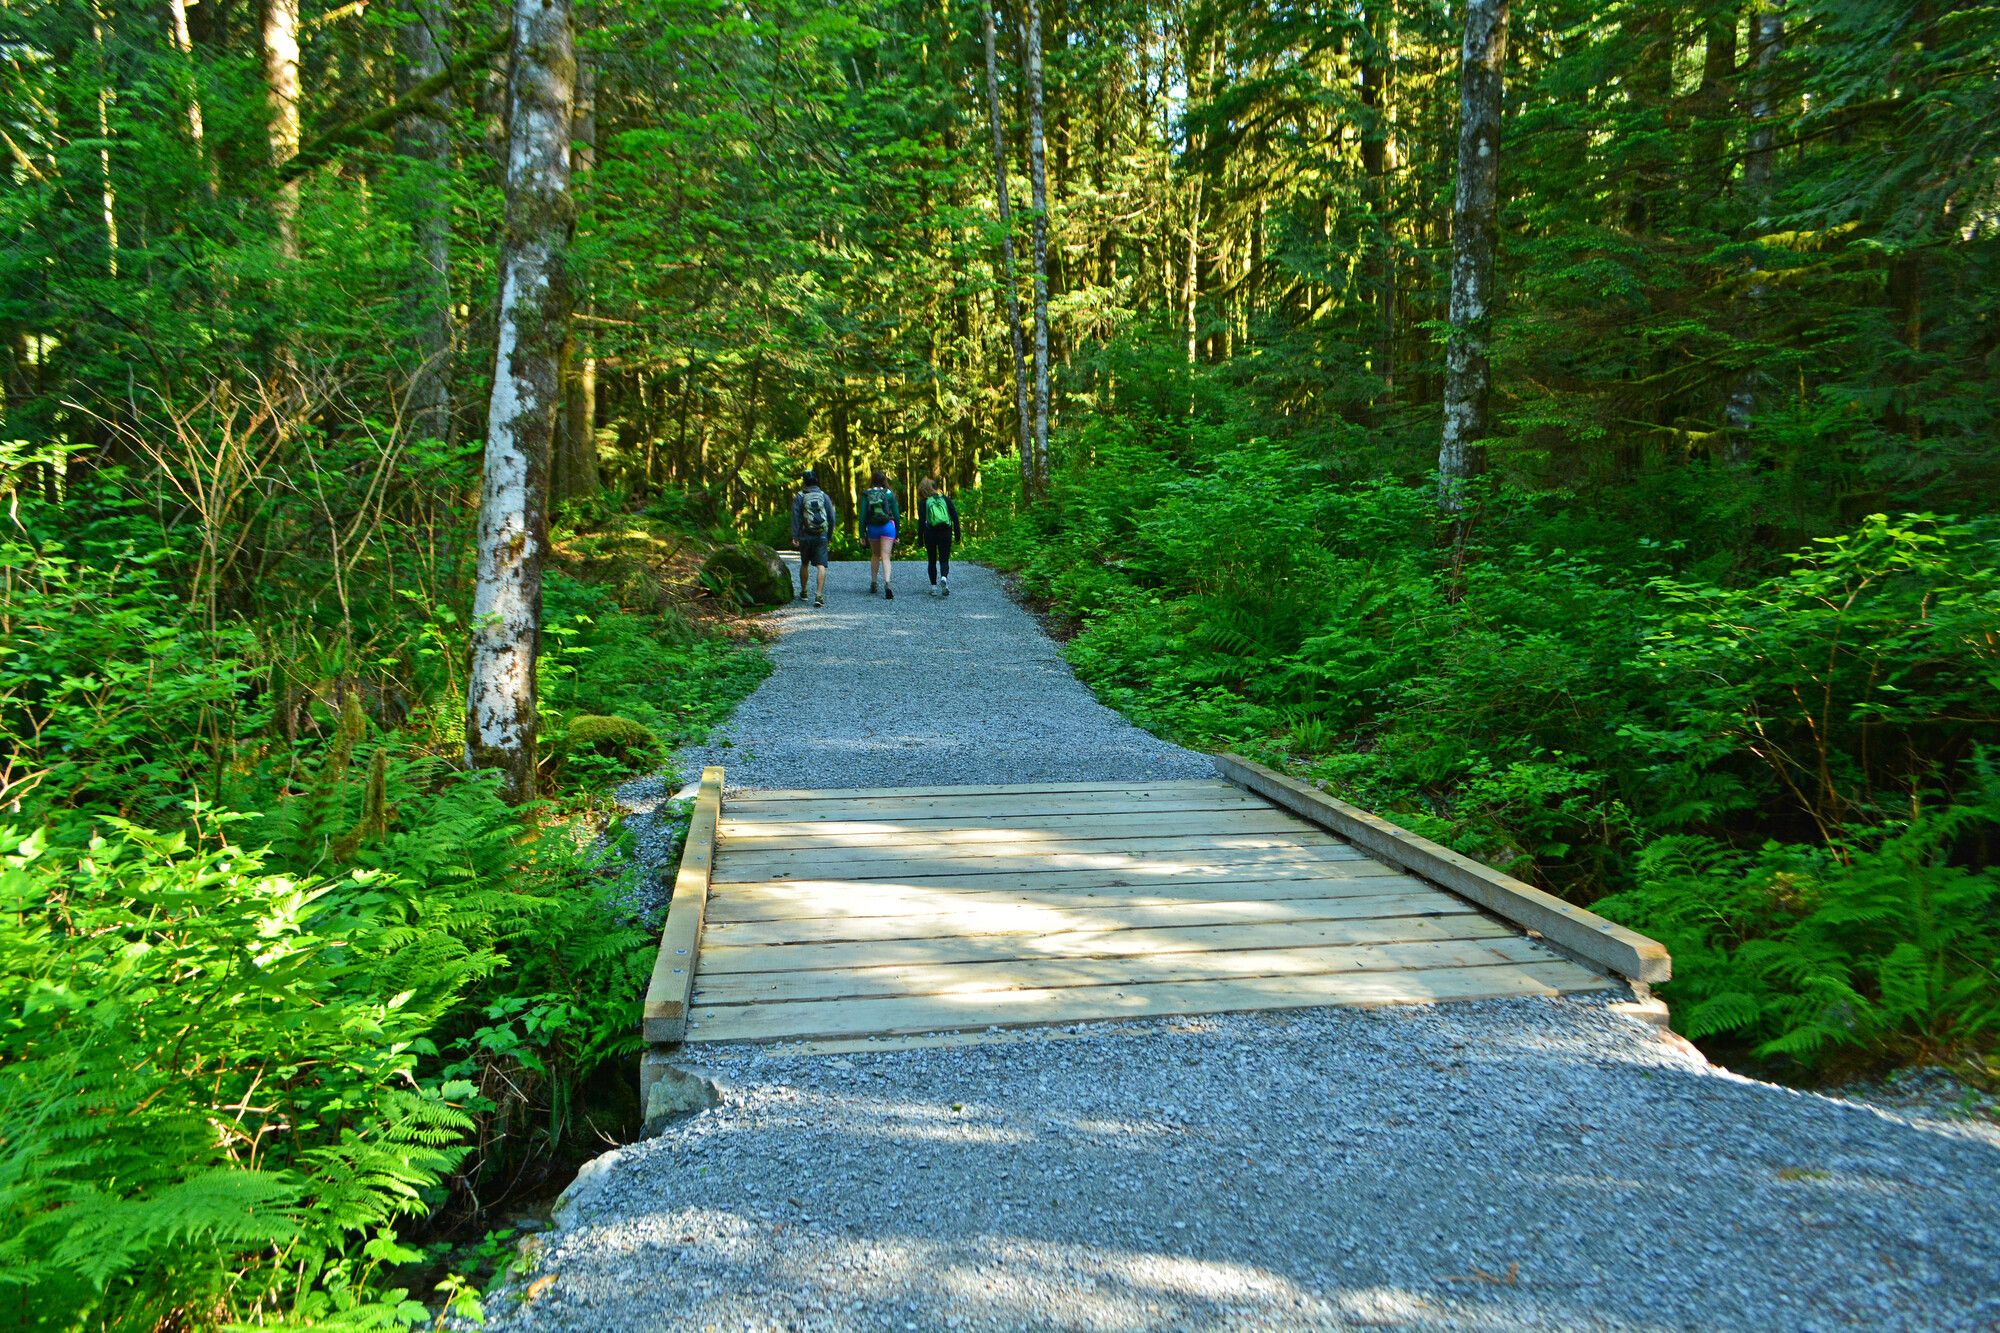 Park visitors hiking a trail through the forest in Golden Ears Park.